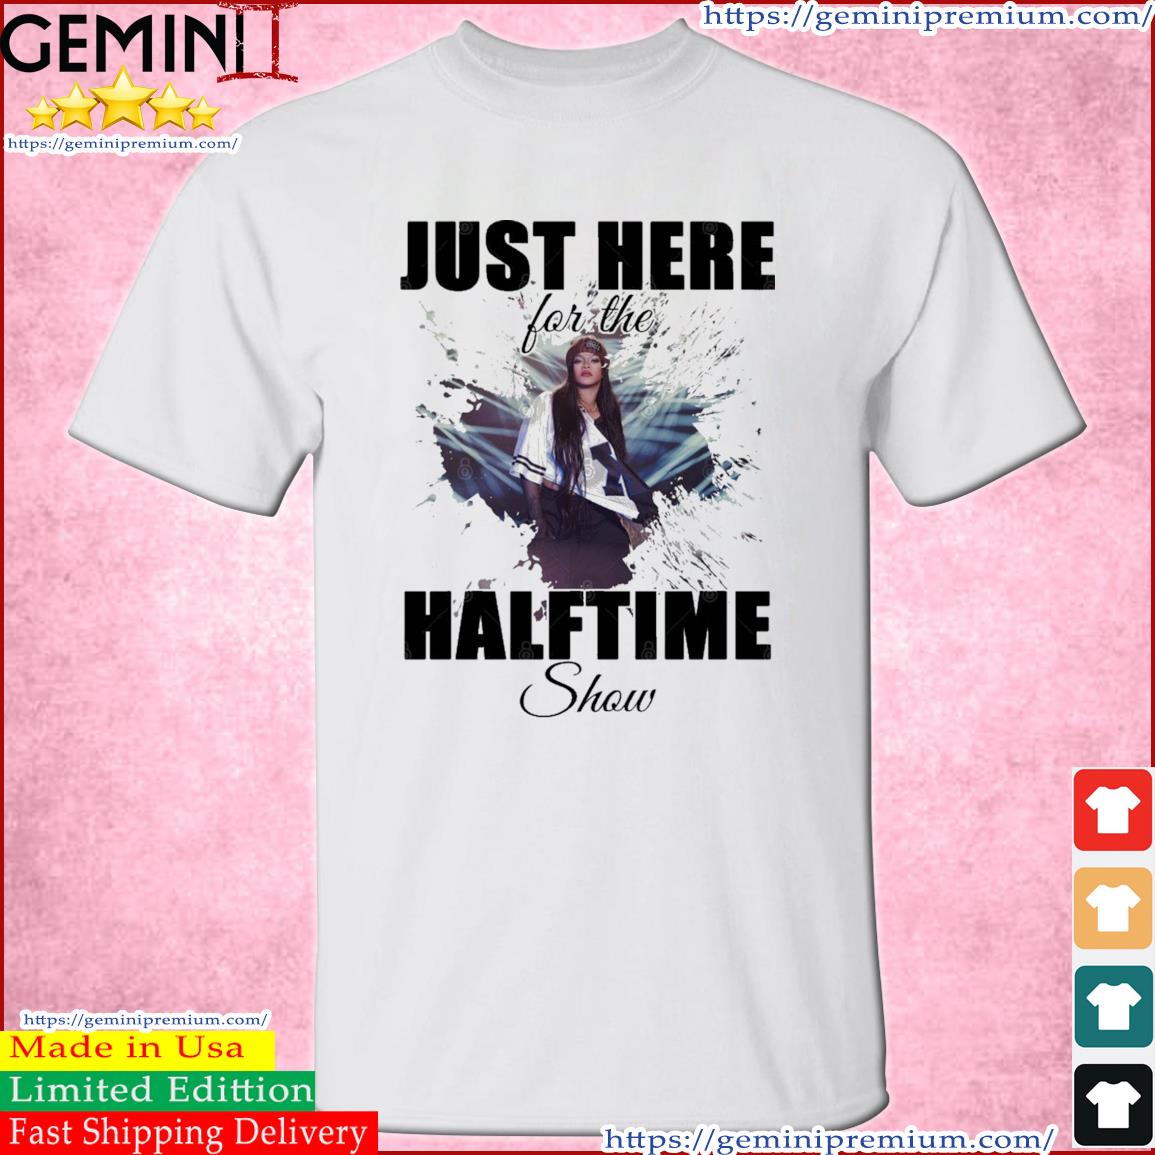 Rihanna Super Bowl LVII - Just Here For The Halftime Show shirt